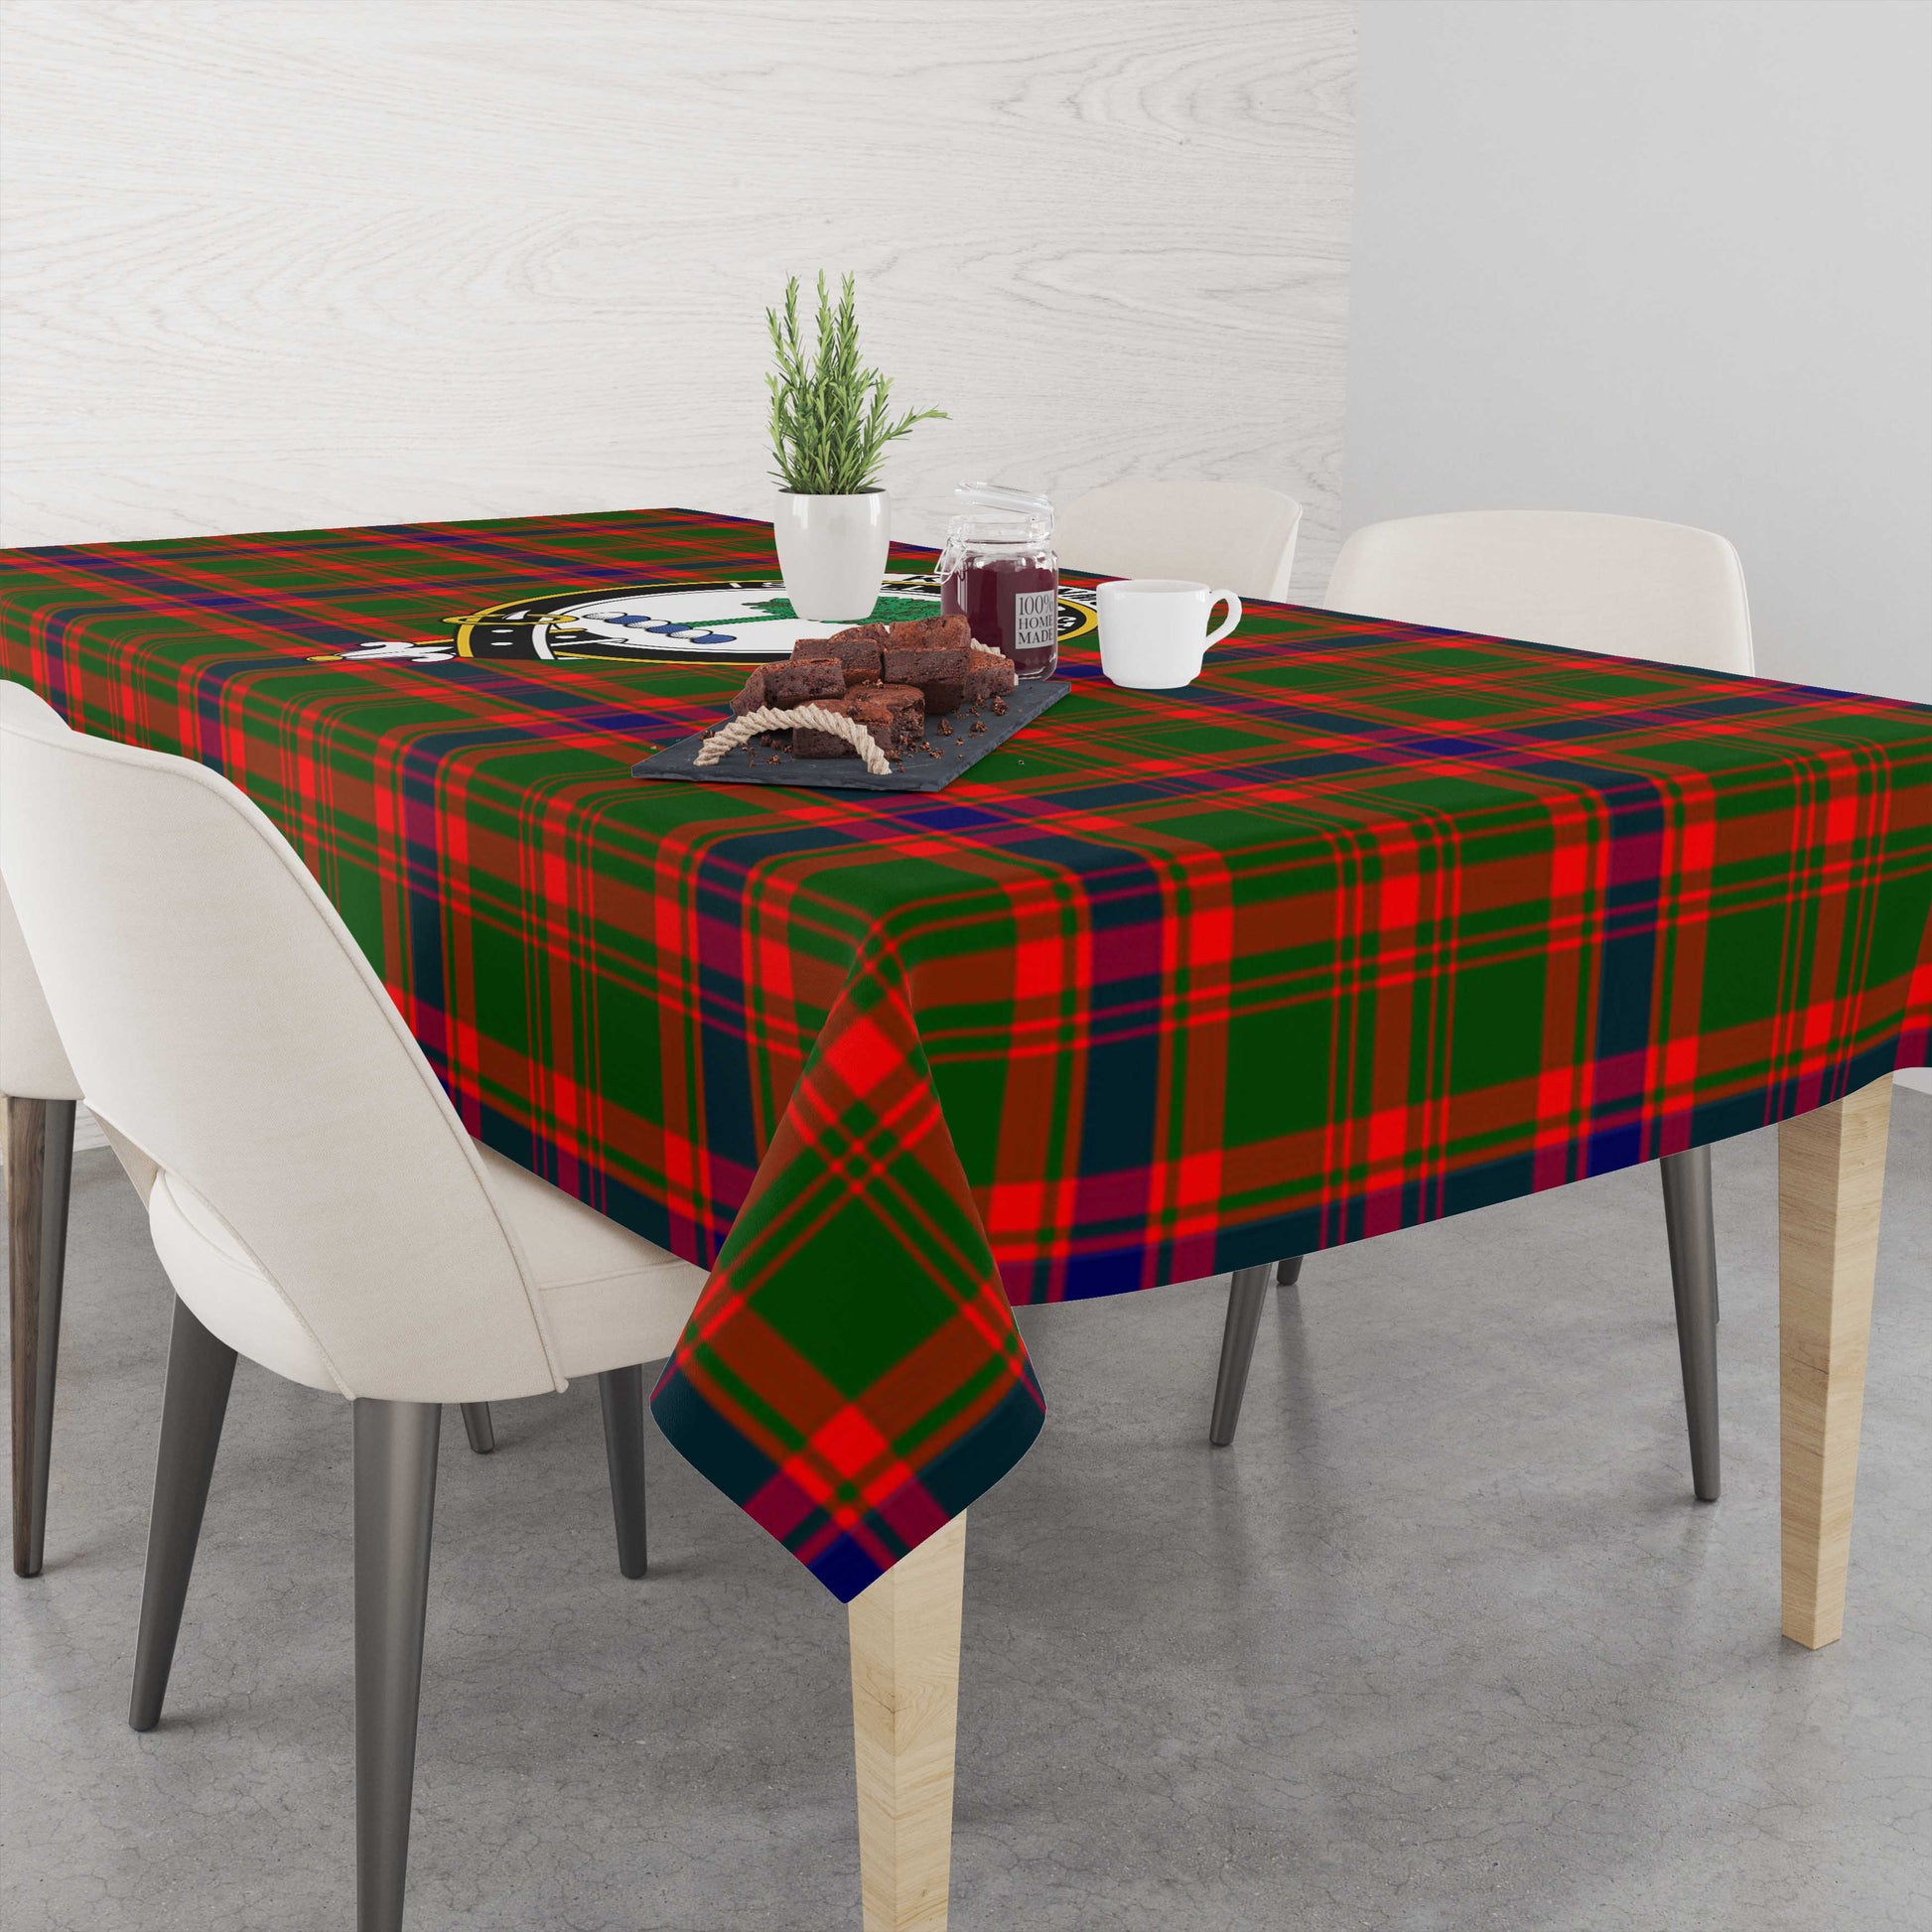 kinninmont-tatan-tablecloth-with-family-crest